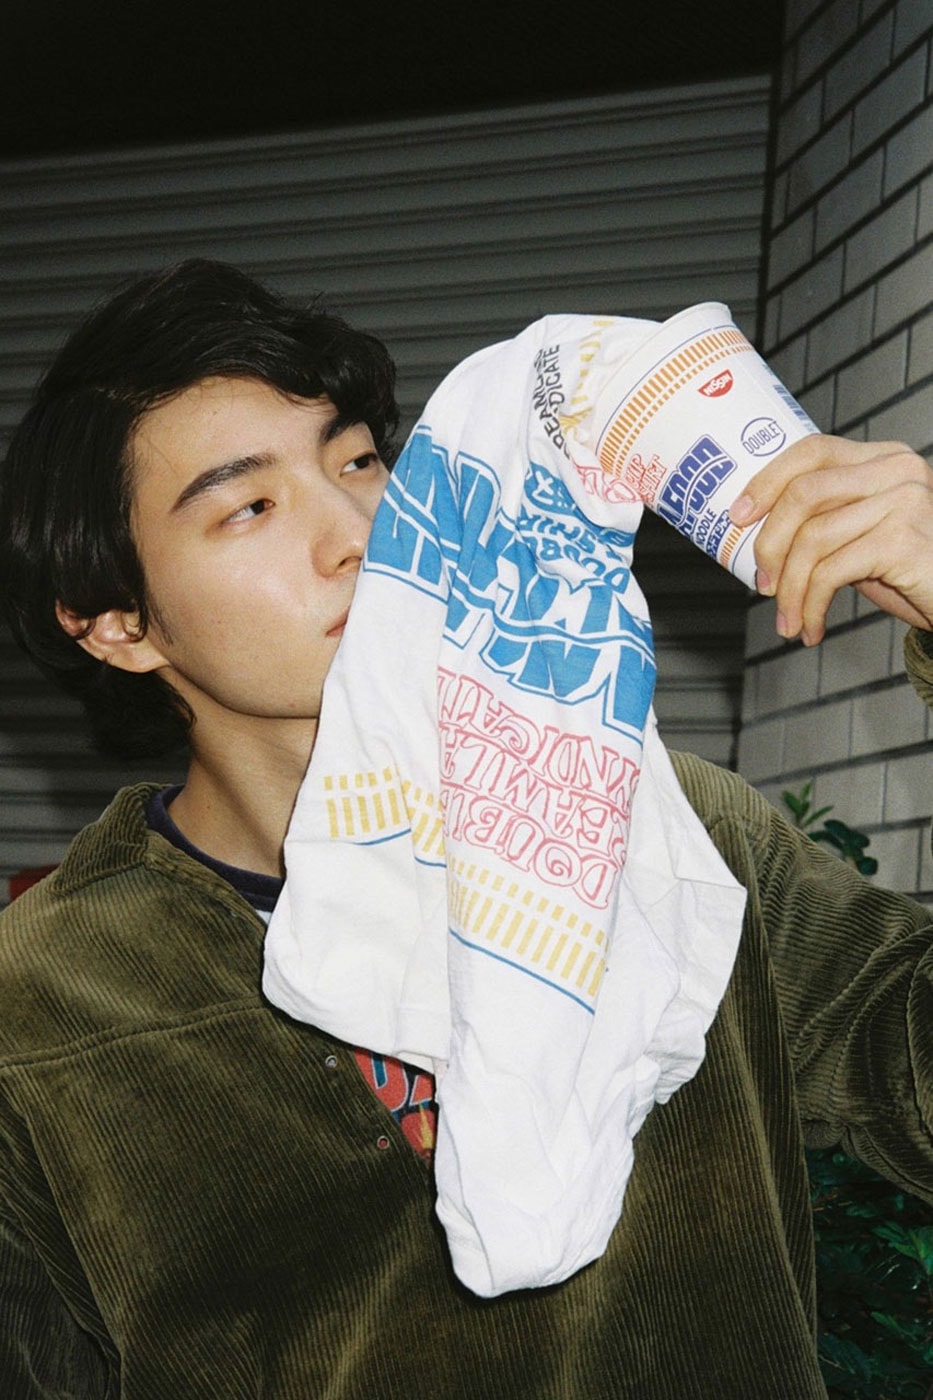 Nissin x doublet Capsule Collection at Shibuya PARCO Pop-Up Japan fahion food & beverage cup noodles bags t-shirts red yellow white